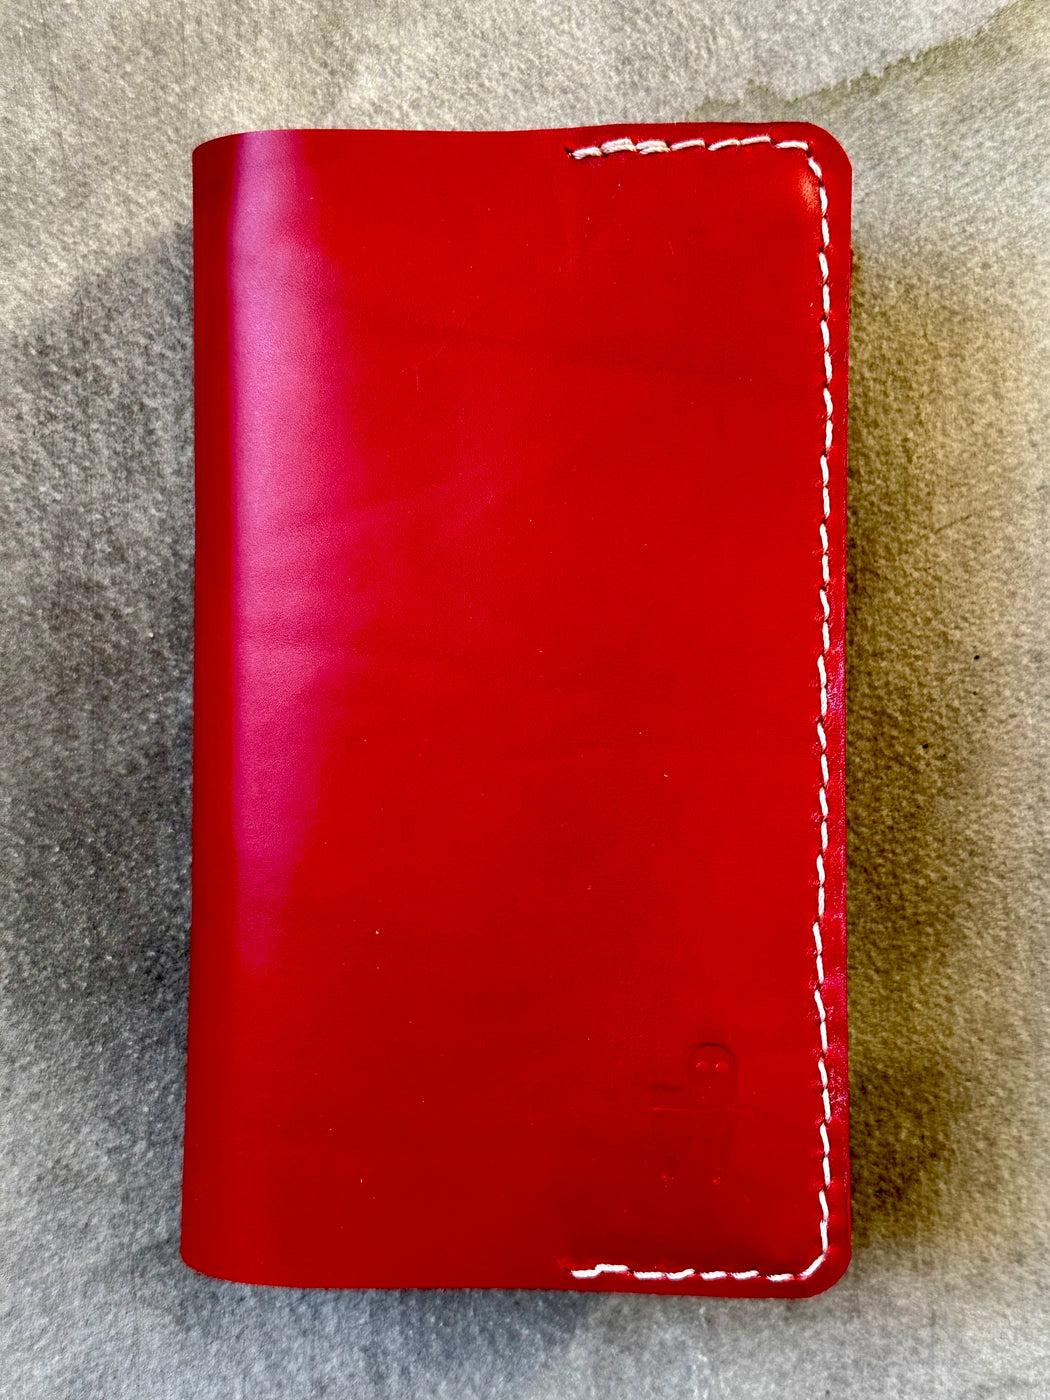 Red Leather Five-Year Journal by Pike Leather